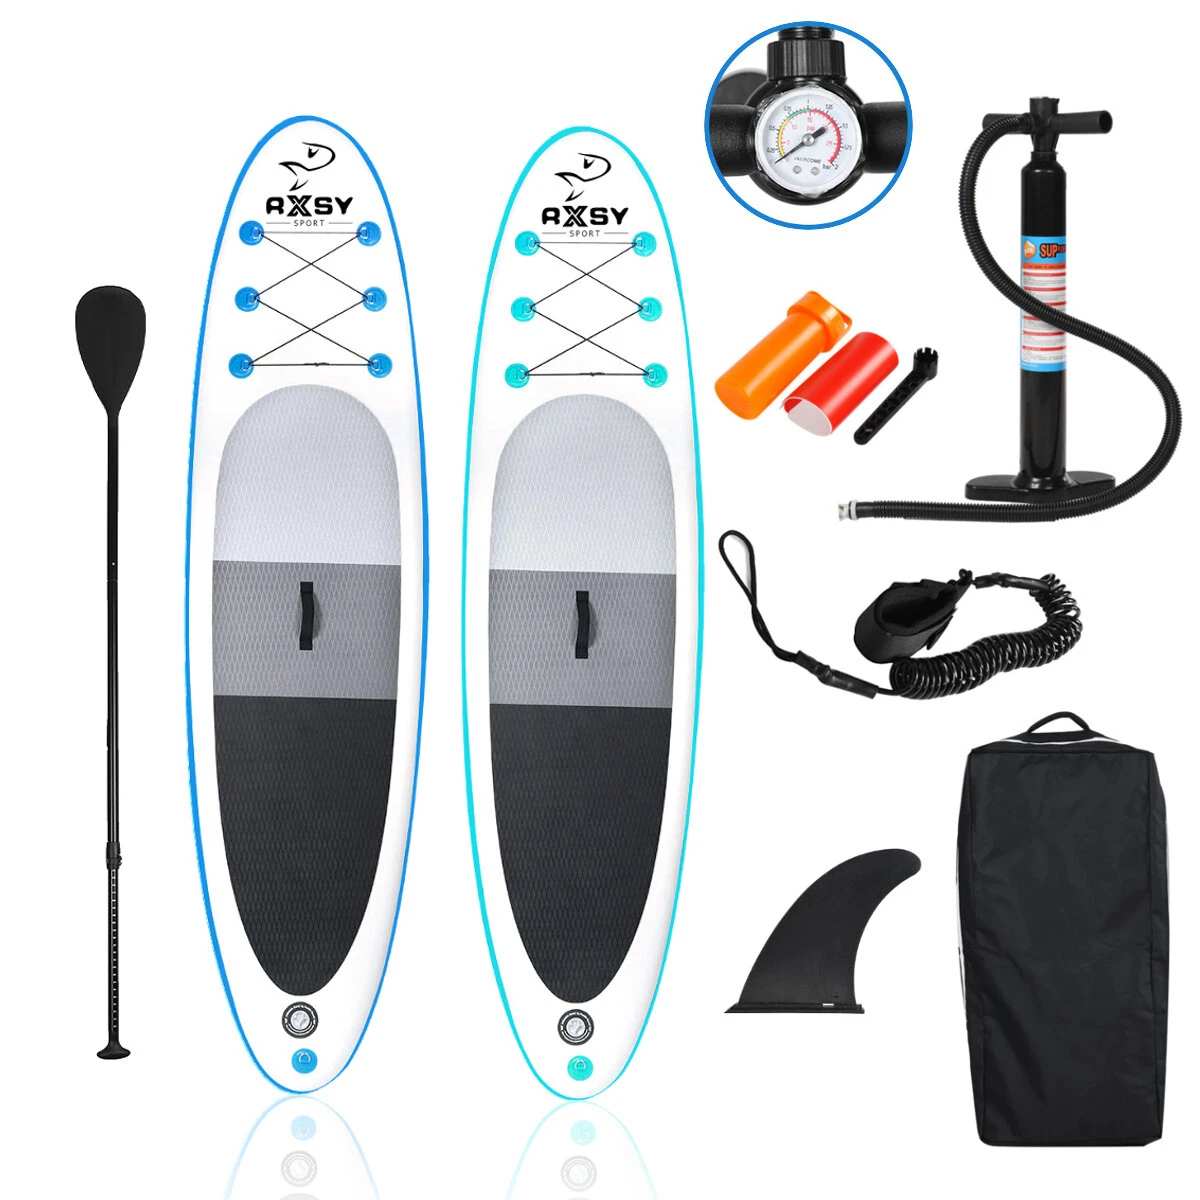 RXSY 10.5 320CM Inflatable Stand Up Surfing SUP Paddle Board Banggood Coupon Promo Code [US Warehouse]